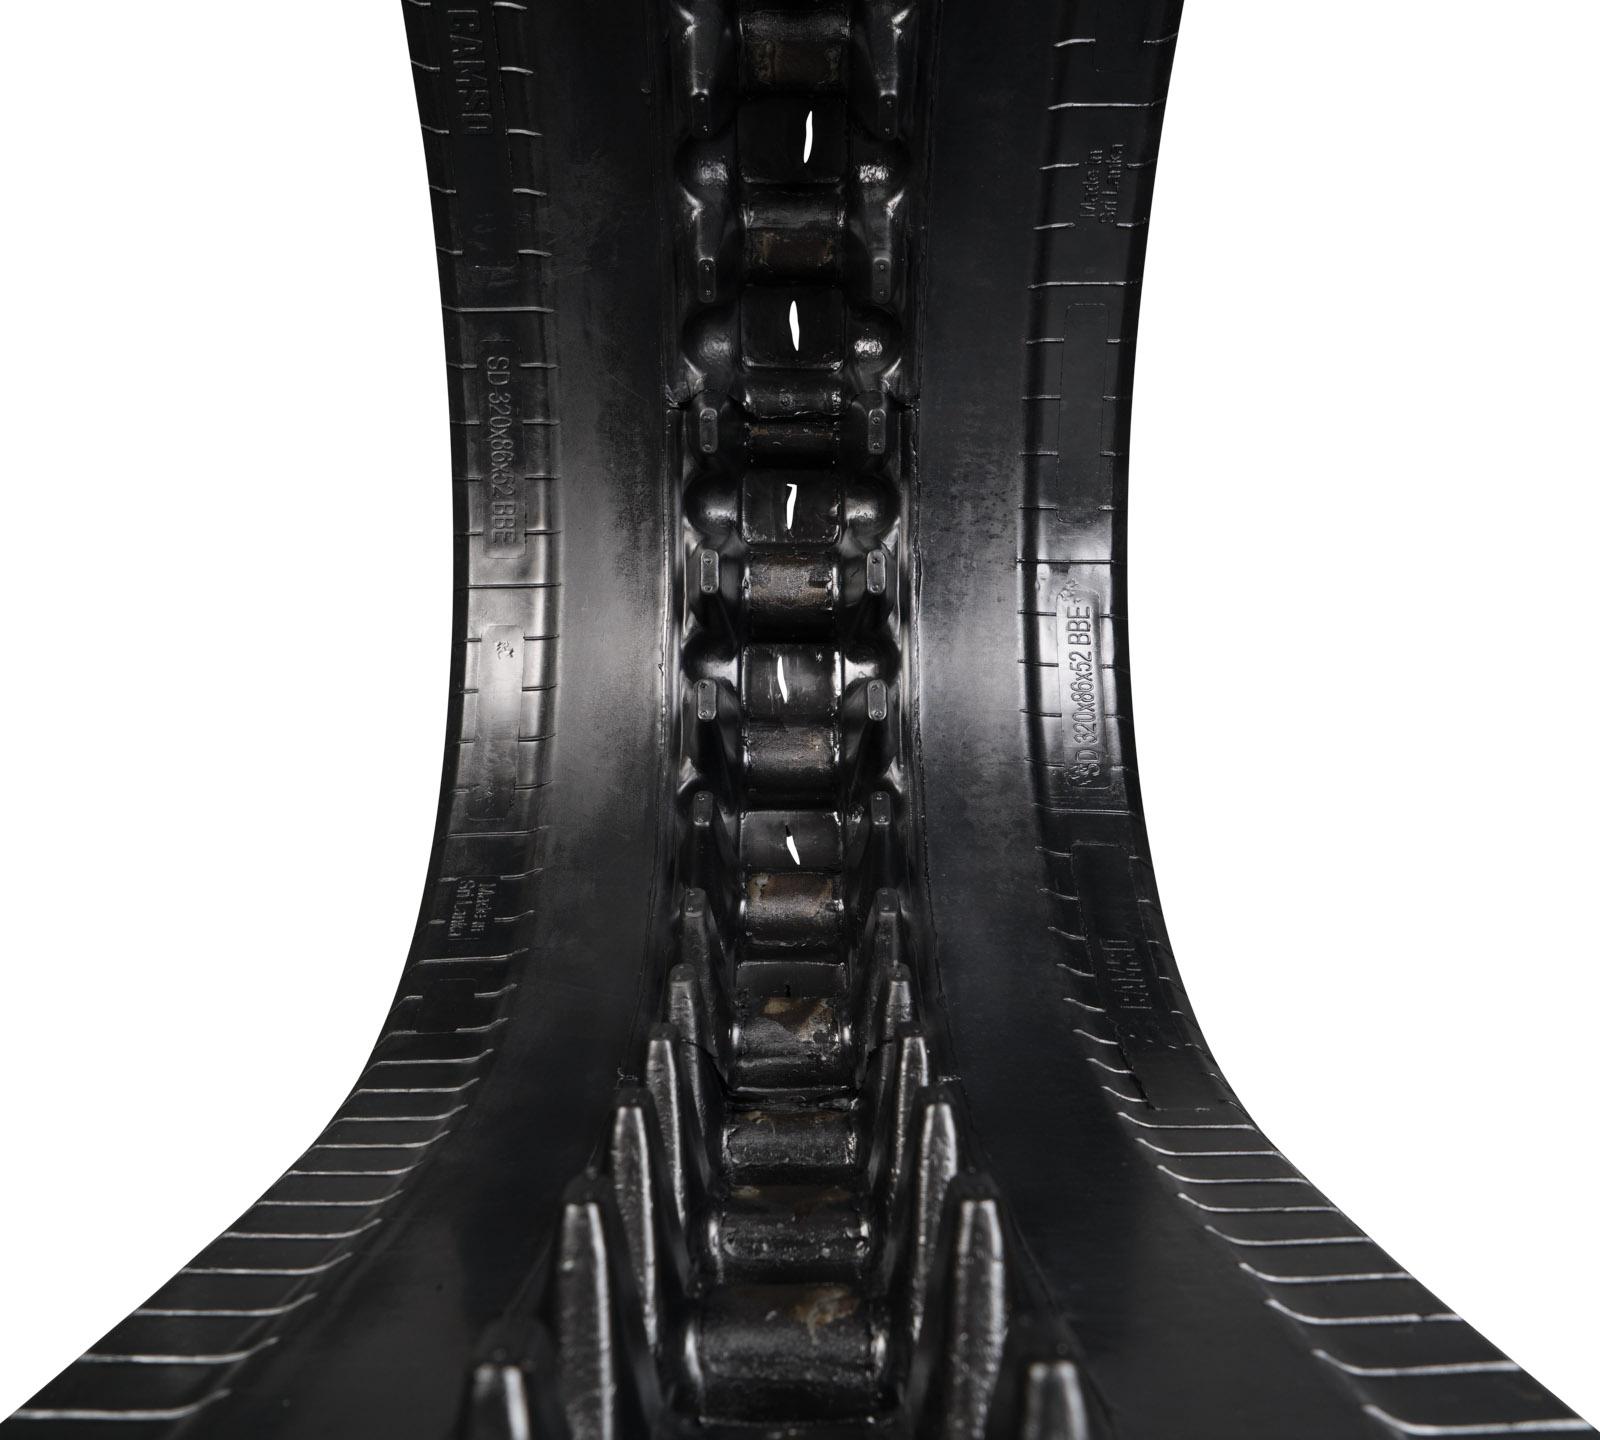 set of 2 13" camso heavy duty sawtooth pattern rubber track (320x86x56)